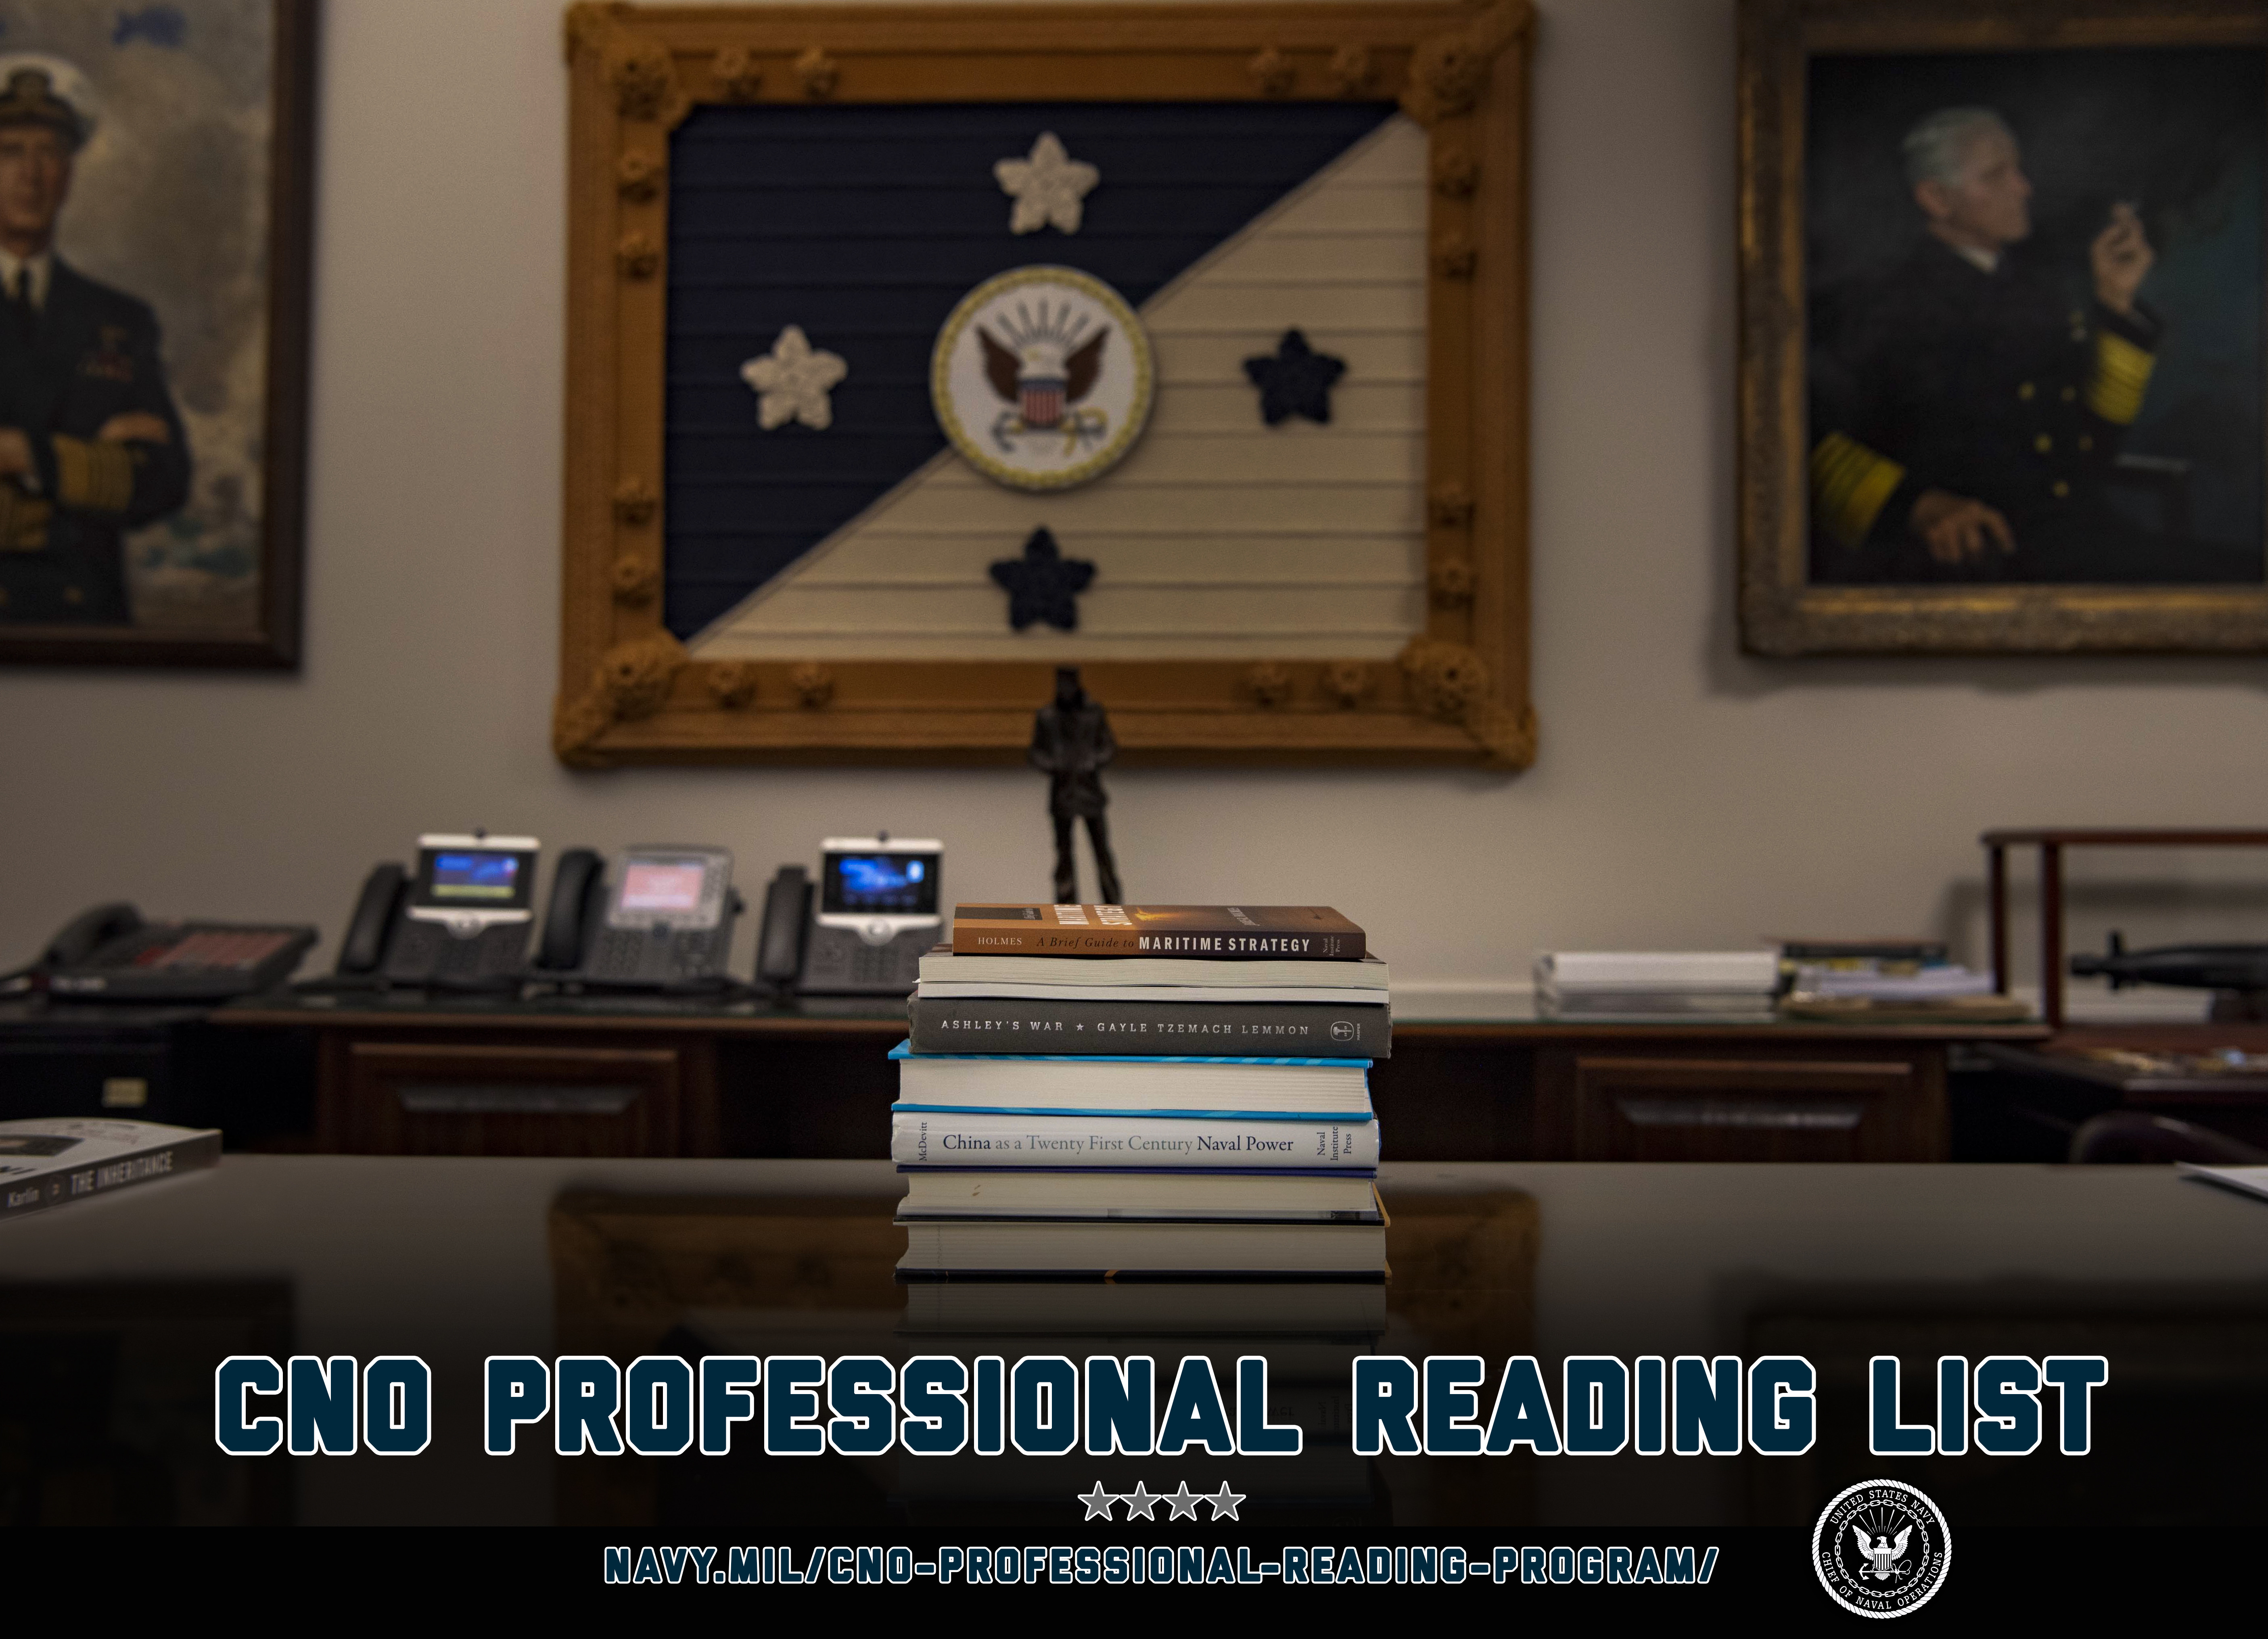 WASHINGTON (May 6, 2022) This is a graphic, made for Chief of Naval Operations (CNO) Adm. Mike Gilday's Professional Reading List 2022. (U.S. Navy photo by Chief Mass Communication Specialist Amanda Gray/Released)